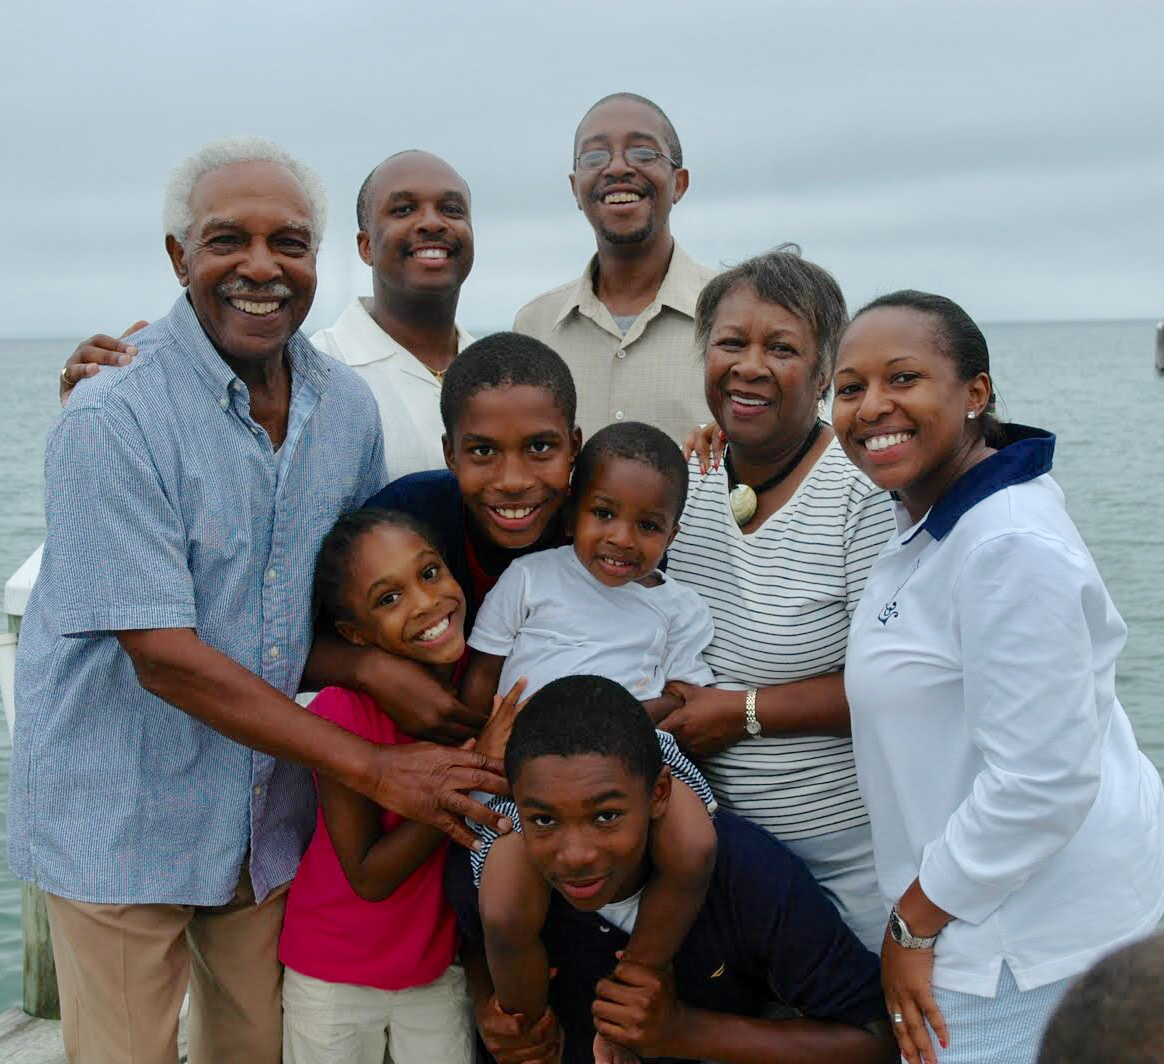 Leon Haley Jr. with his family in 2010.